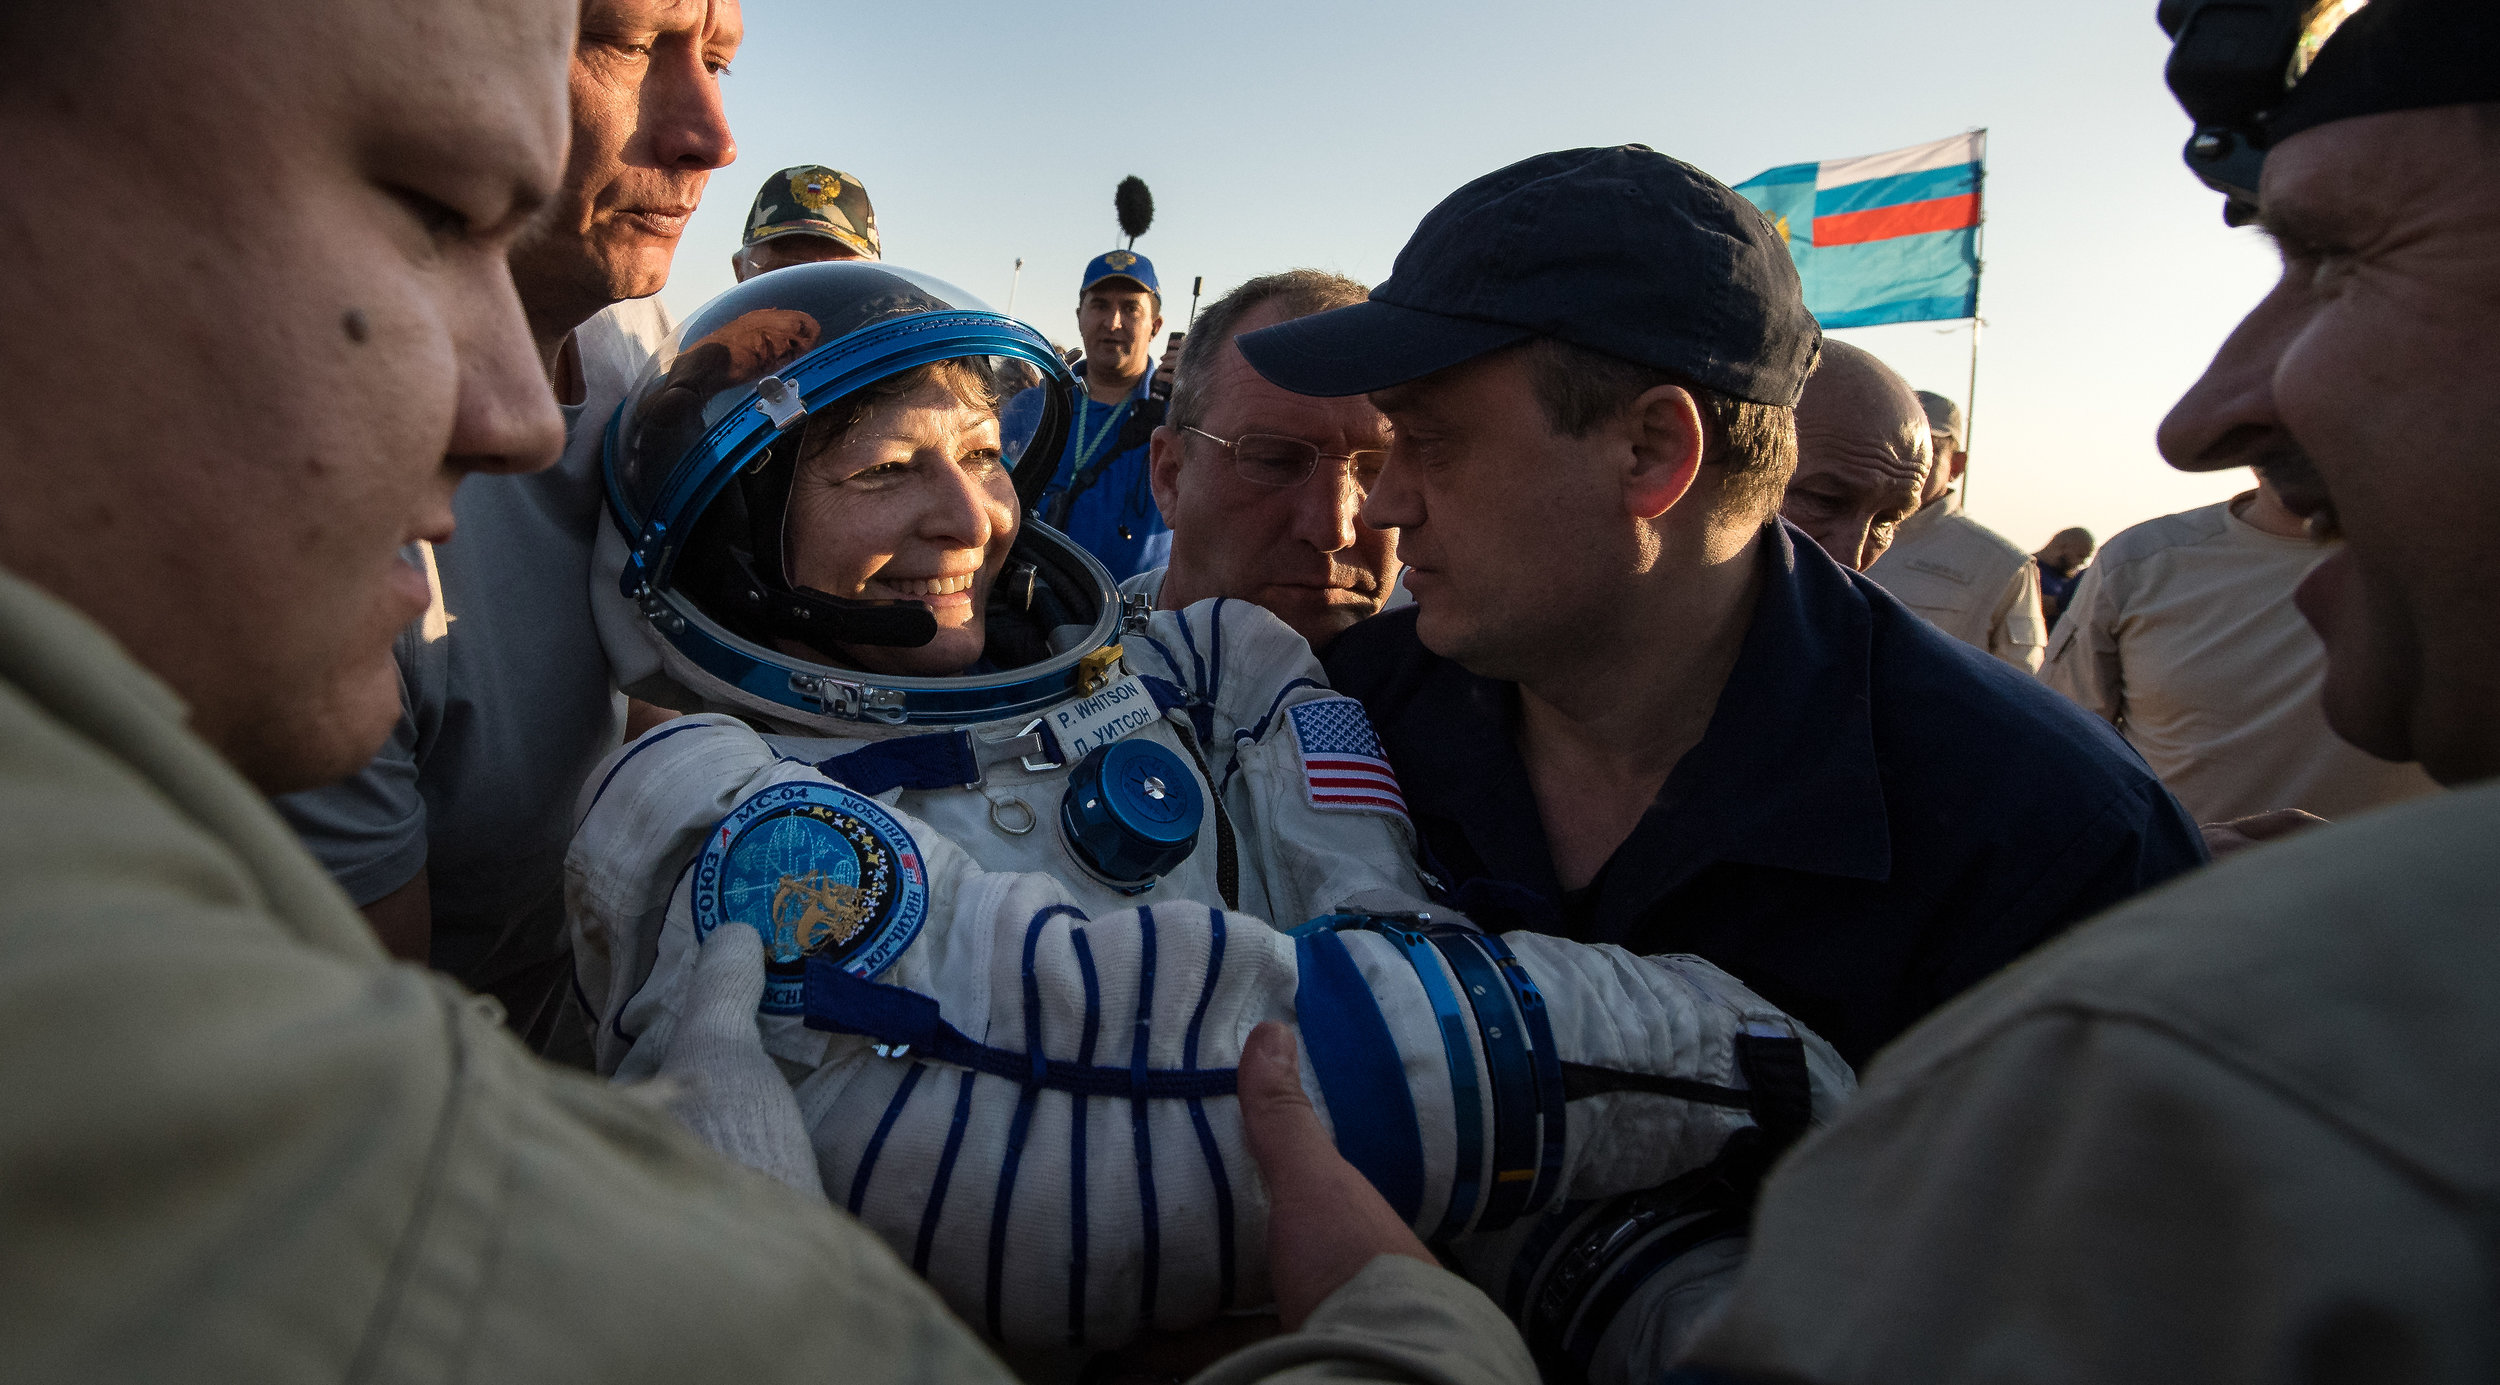  Peggy Whitson was the final crew member of Soyuz MS-04 to be helped out. All three were placed on lawn chair-like couches for an initial health check before being transported to a nearby medical tent for further evaluation. Photo Credit: Bill Ingall